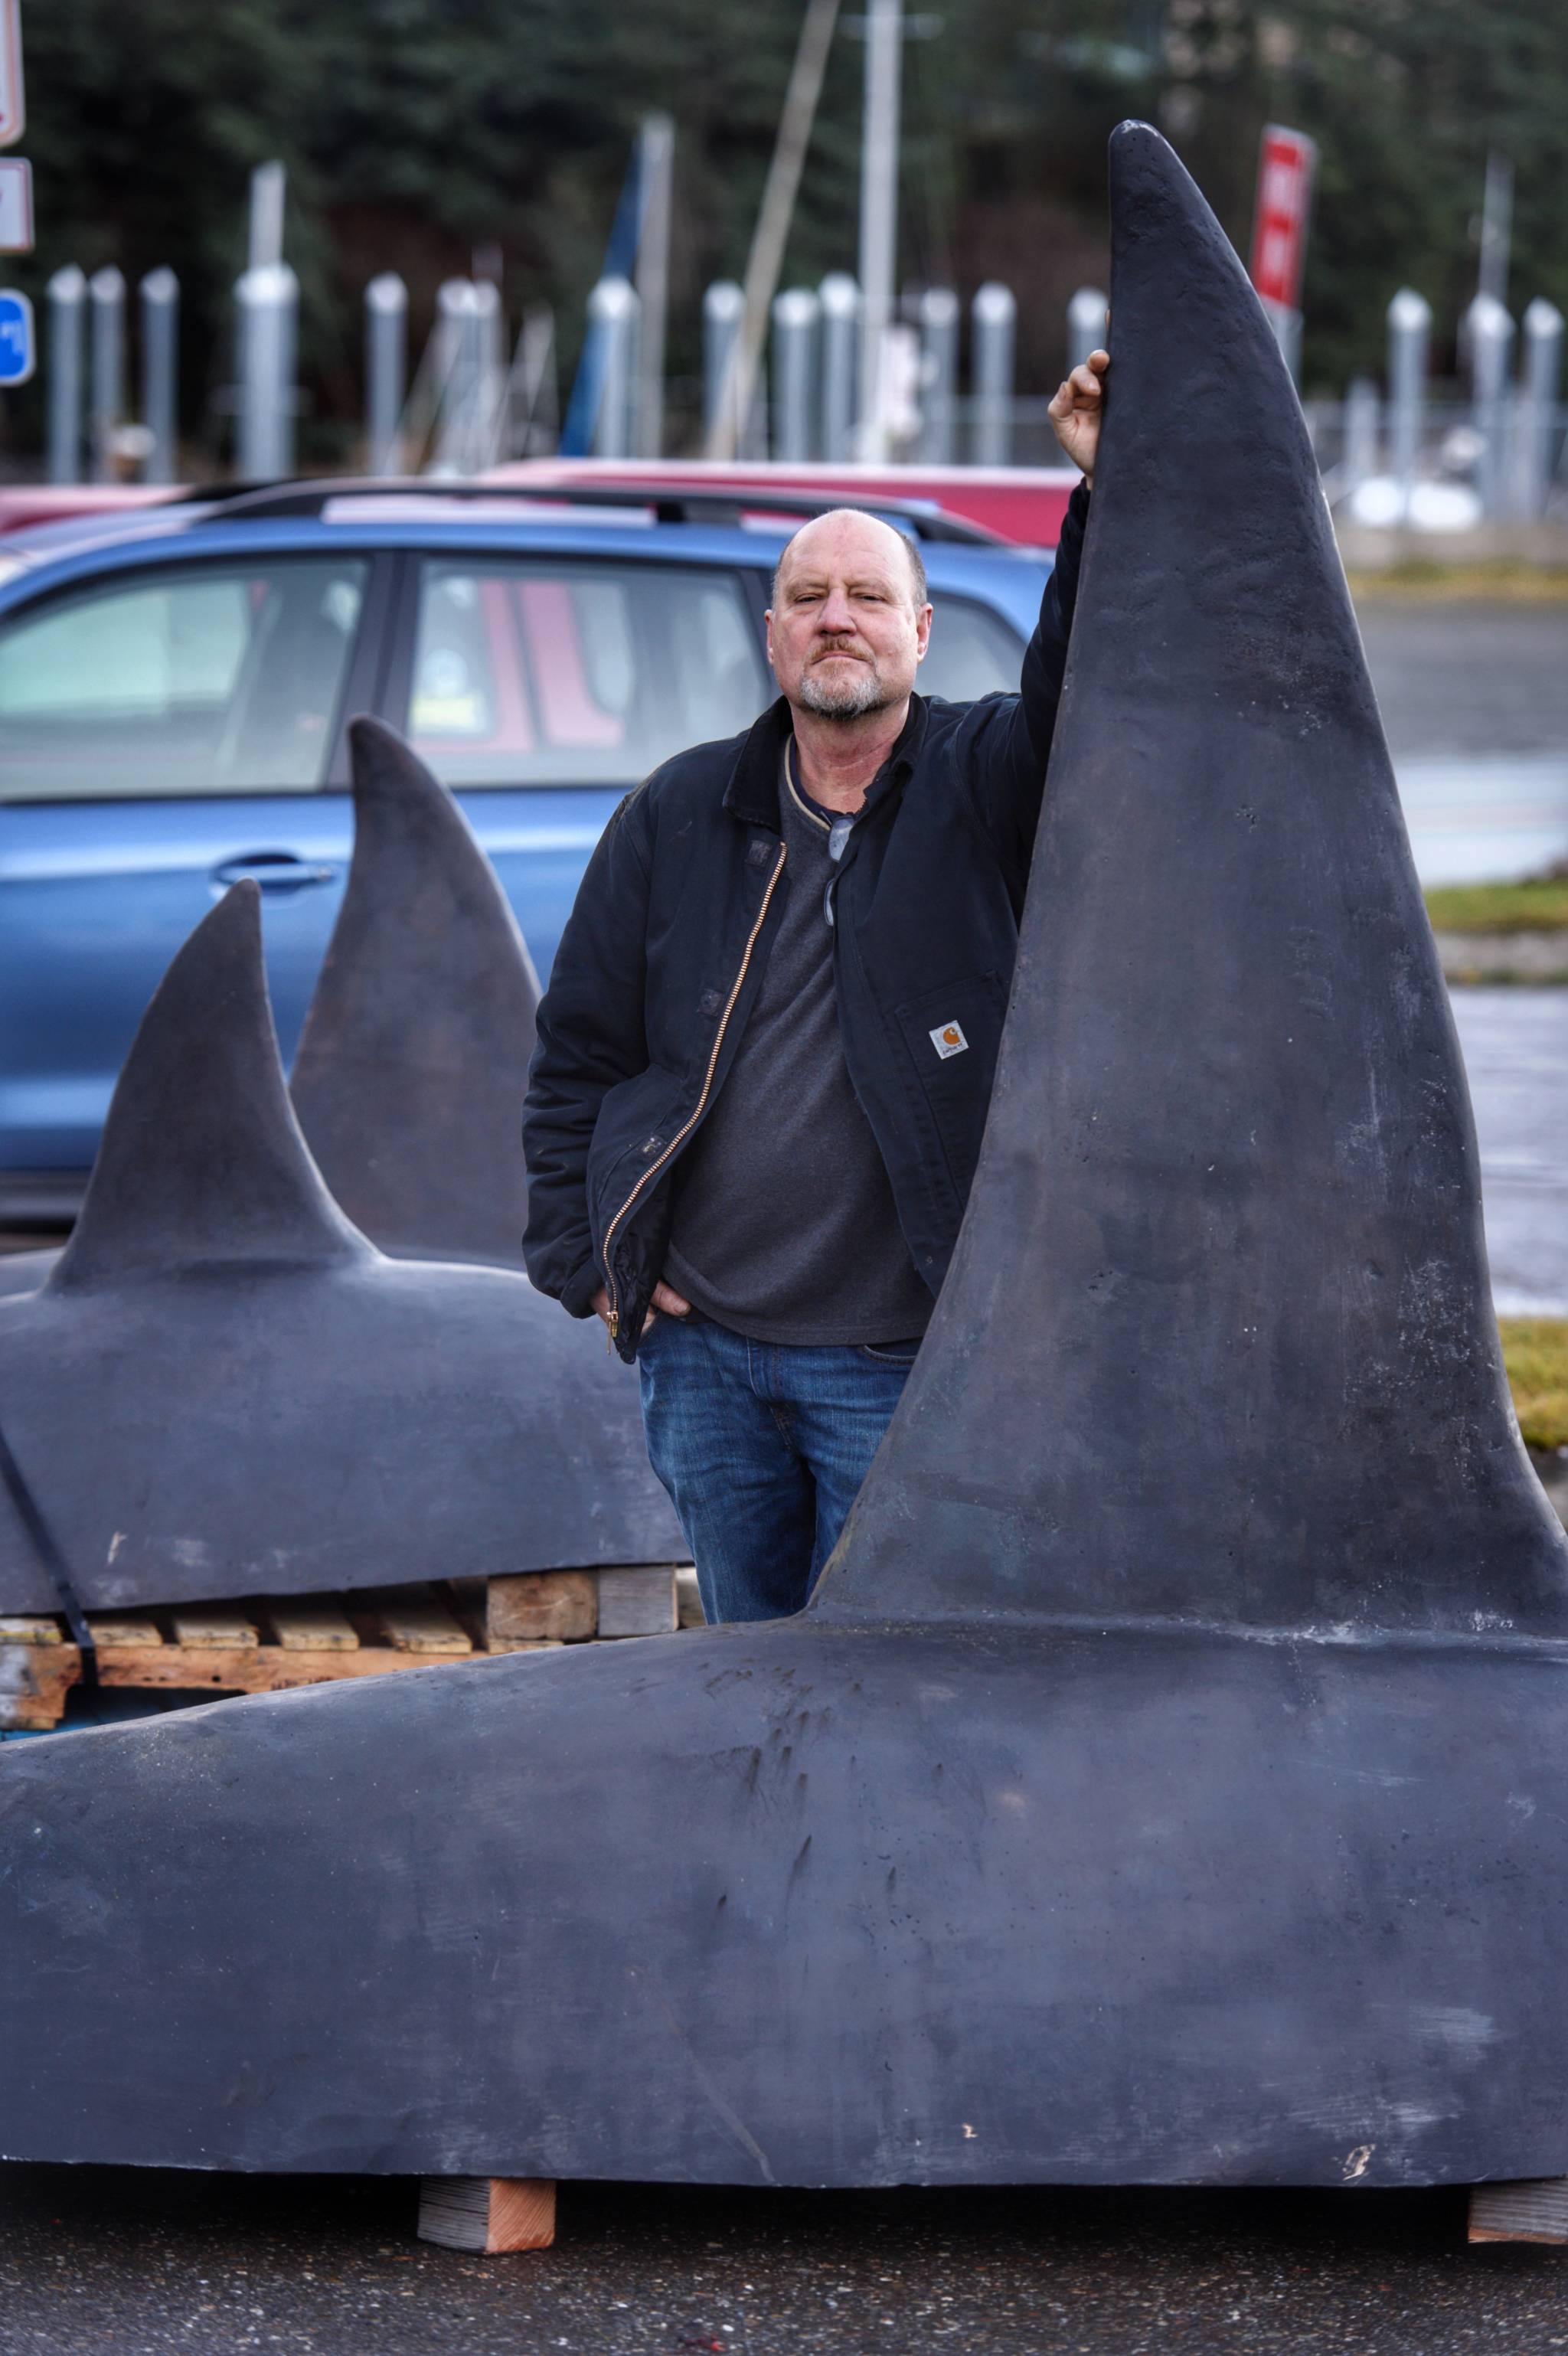 Palmer artist John Coyne stands next to his three orca sculptures ready for installation at the Douglas Fish & Game Building on Thursday, Nov. 15, 2018. (Michael Penn | Juneau Empire)